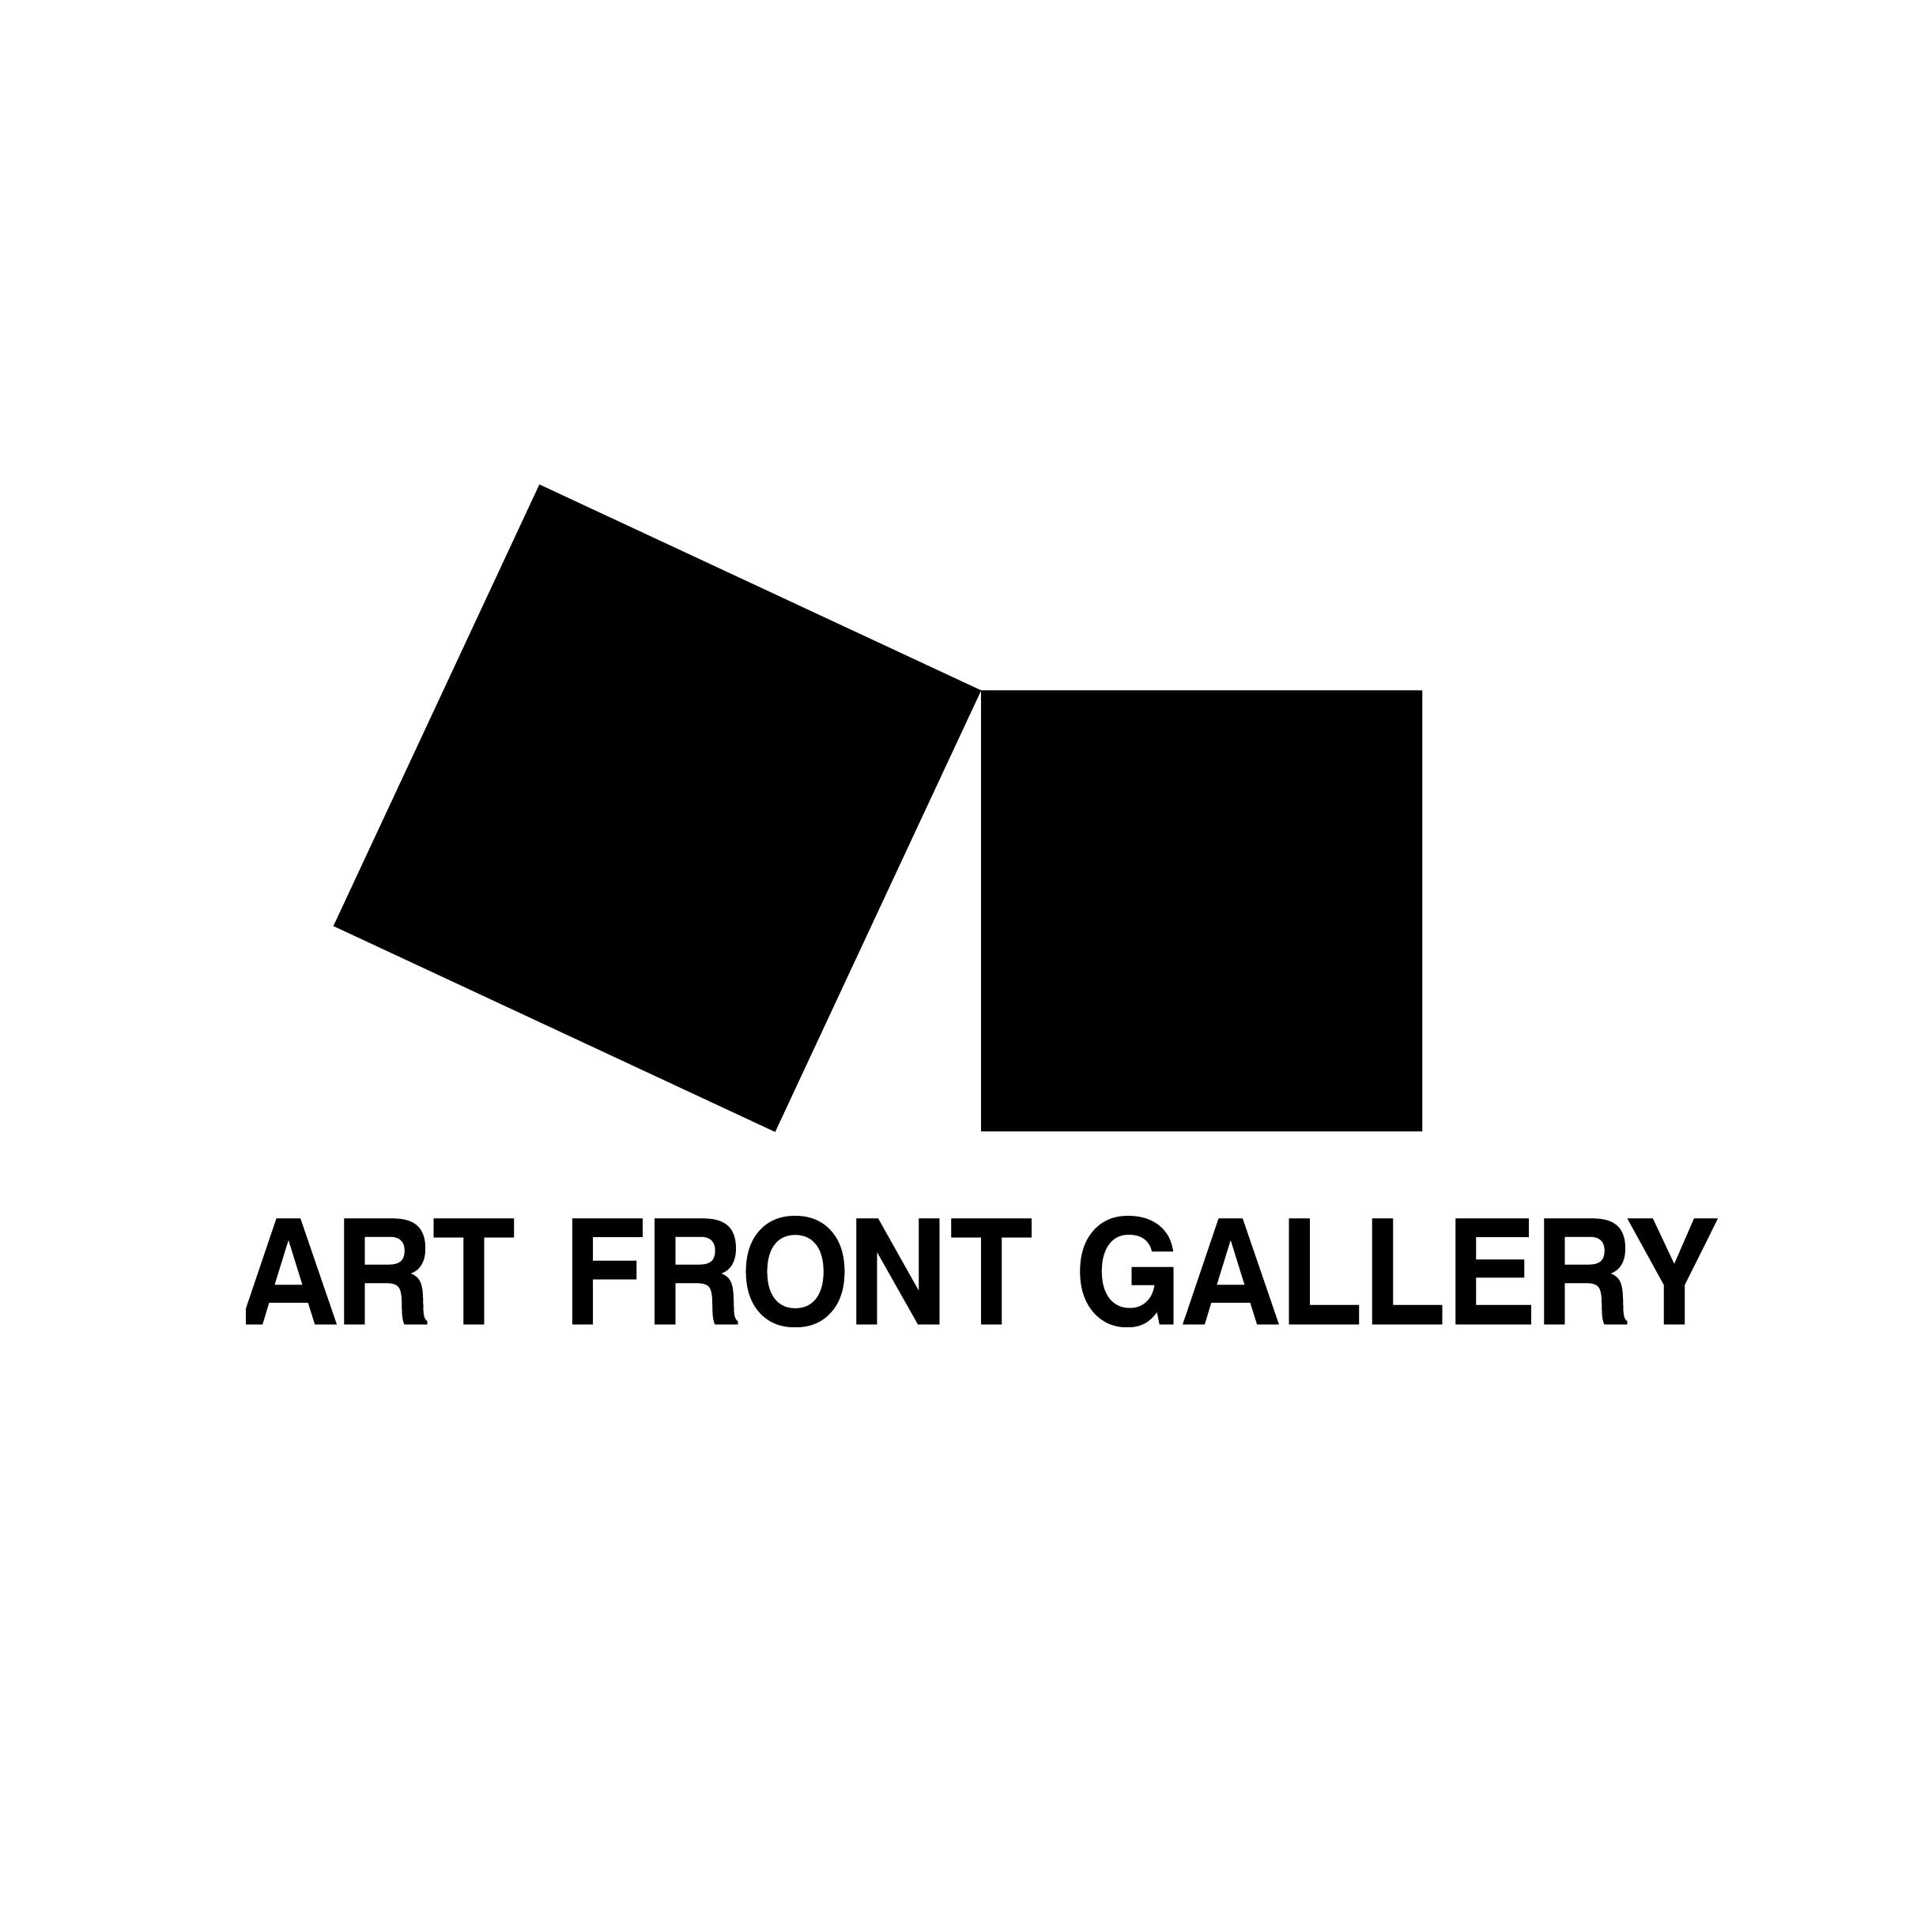 Opening hours changed at Art Front Gallery.